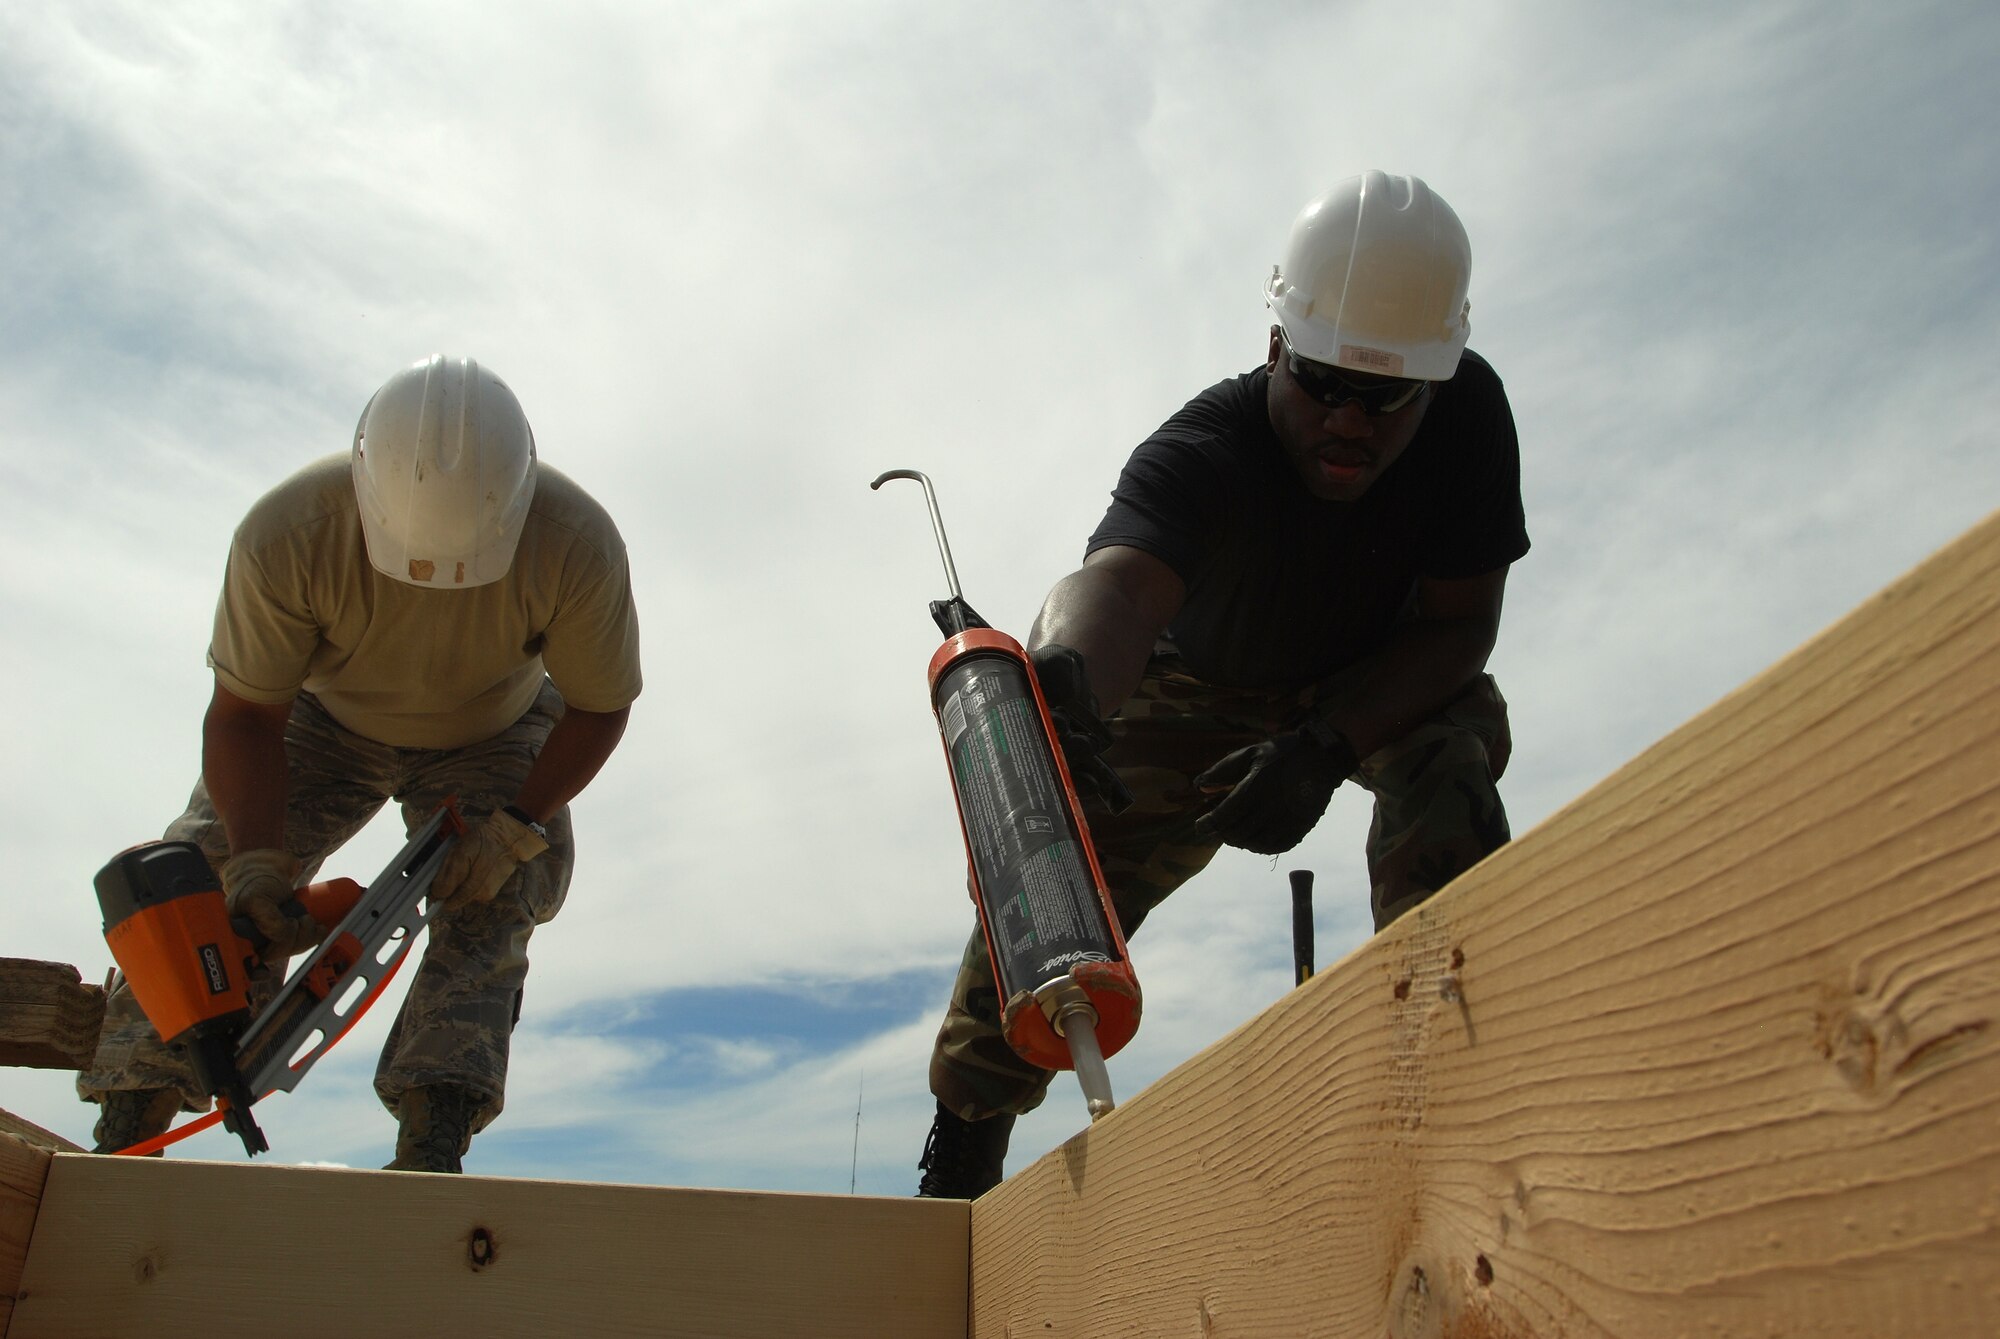 Members of the 433rd Civil Engineering Squadron conduct a humanitarian mission in the Red Lake Indian Reservation for the Red Lake band of Chippewa Indians, just outside of Bemidji, Minnesota. Tech. Sgt. Frank Mora nails a plywood subfloor down while Tech. Sgt. Mark Johnson applied construction adhesive for the next sheet.(U.S. Air Force photo/Airman 1st Class Brian McGloin)